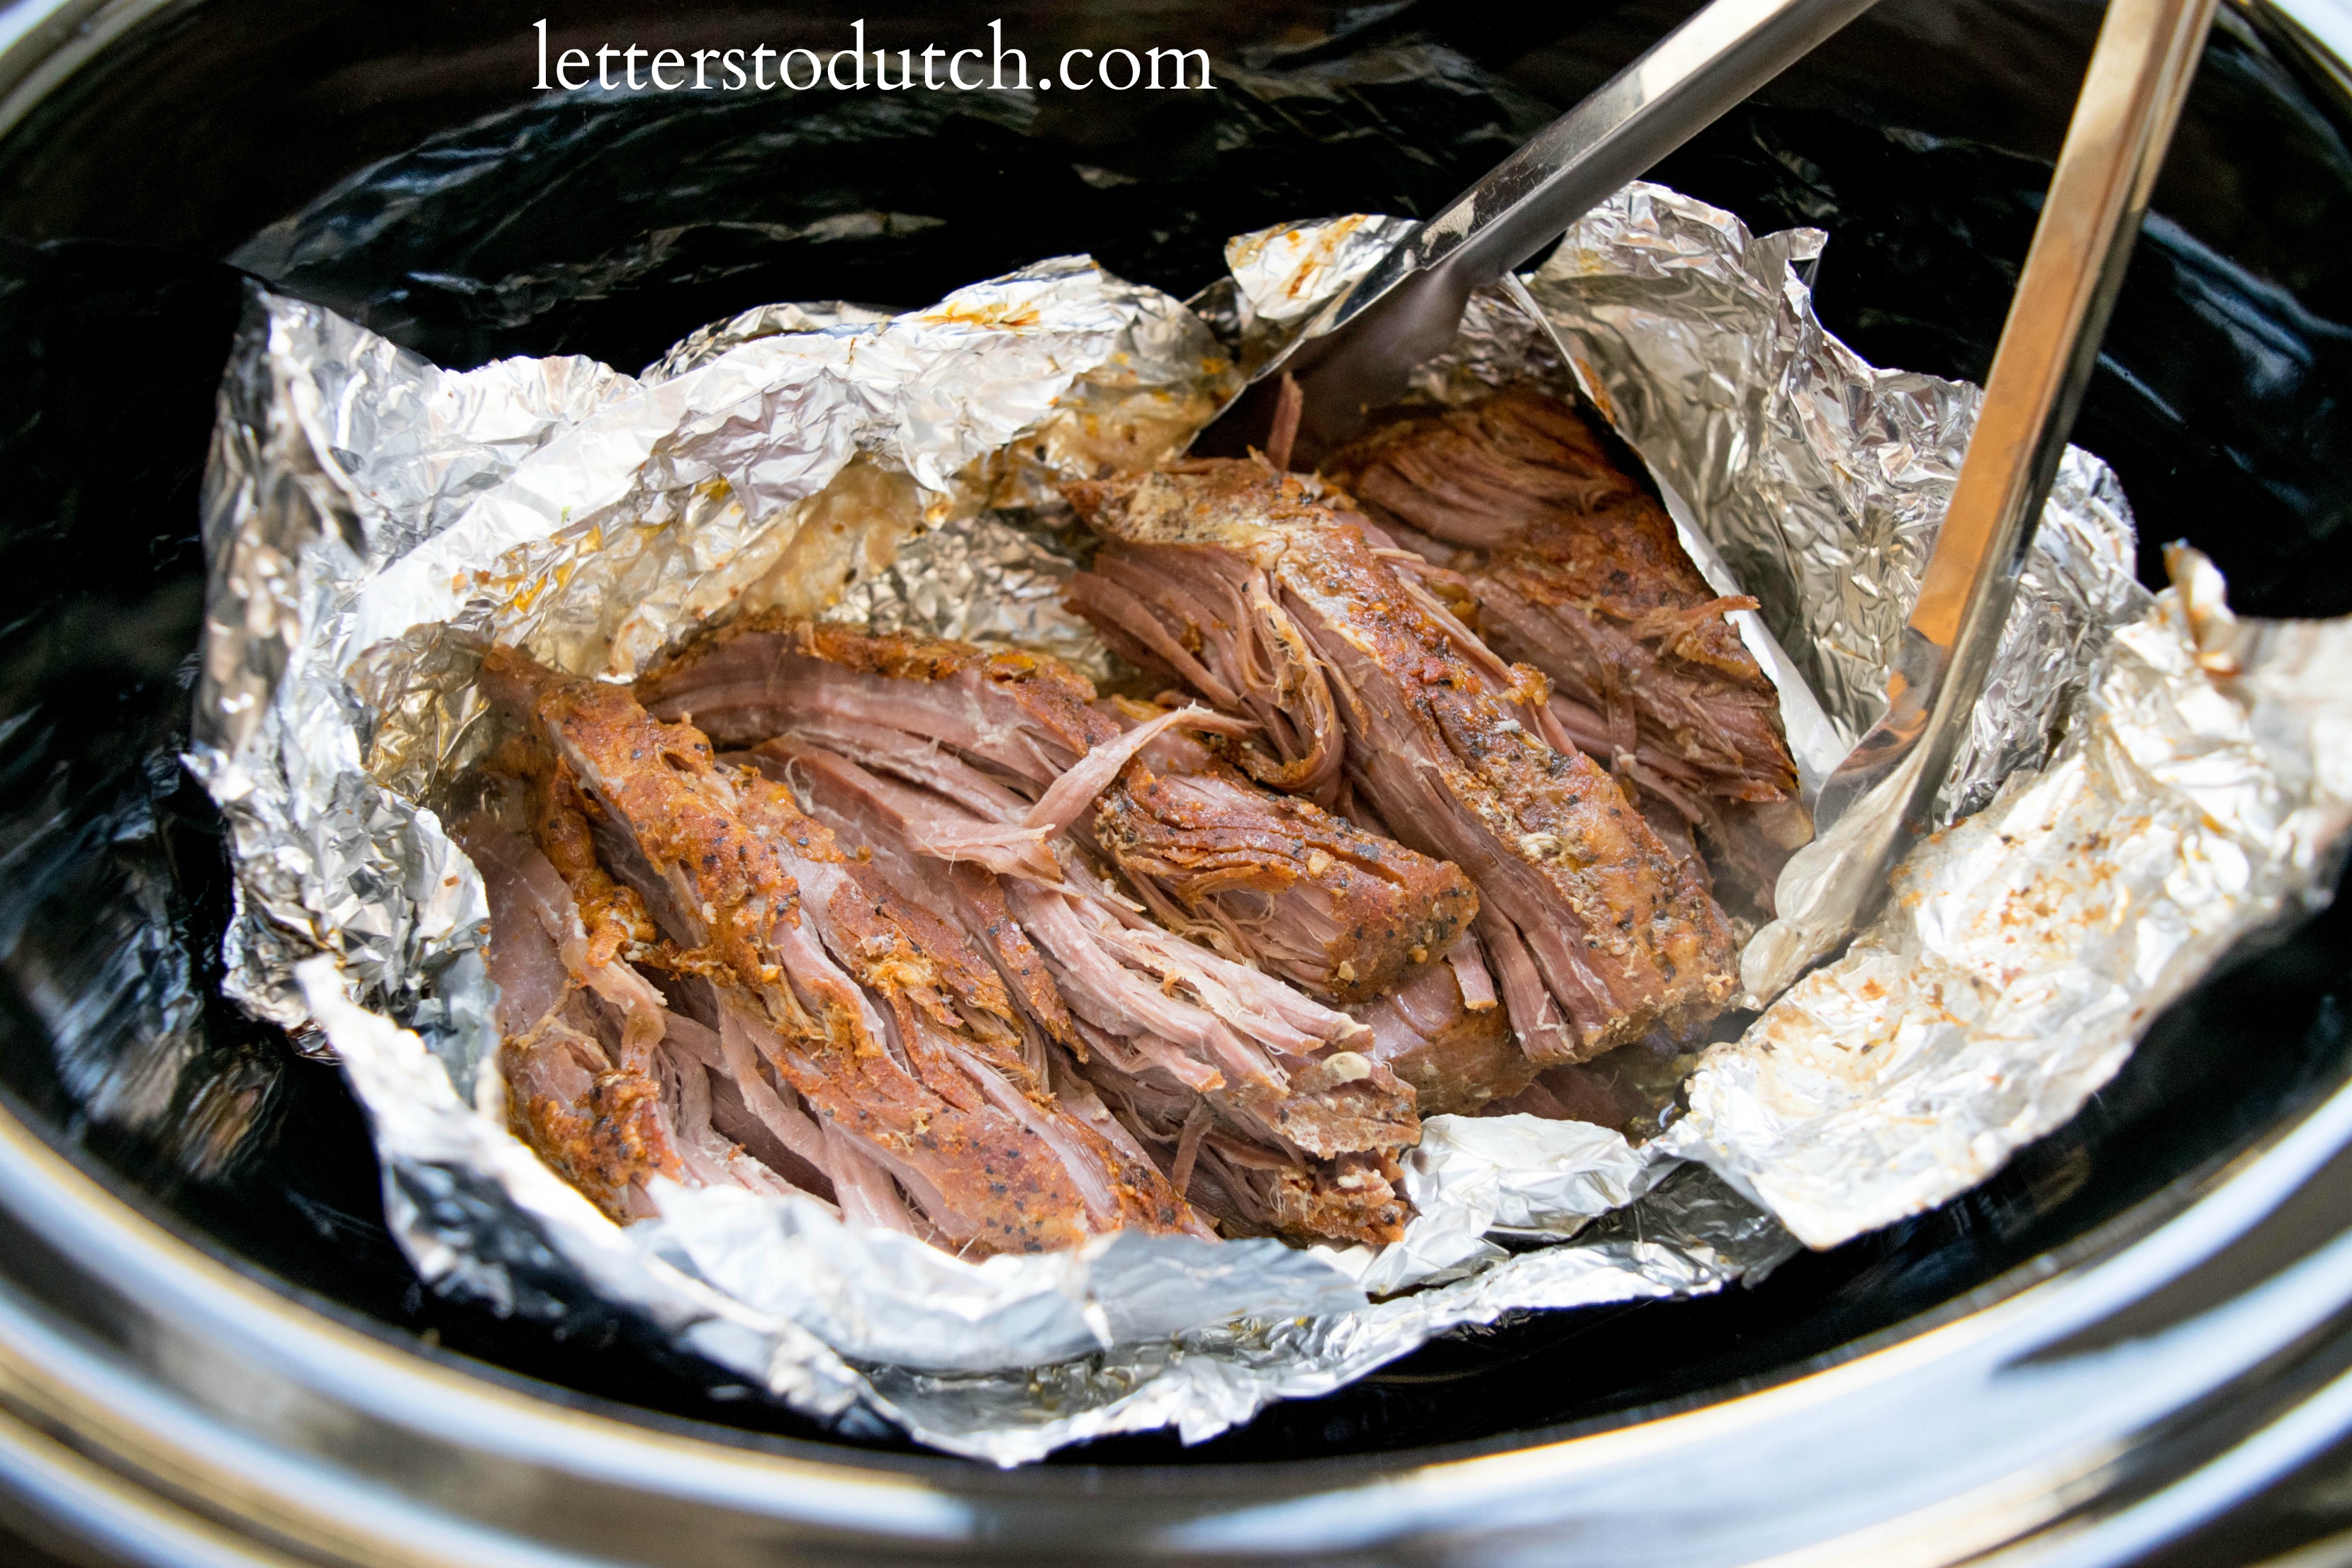 How To Slow Cook Tri Tip Letters To Dutch,Summer Shandy Leinenkugel Beer